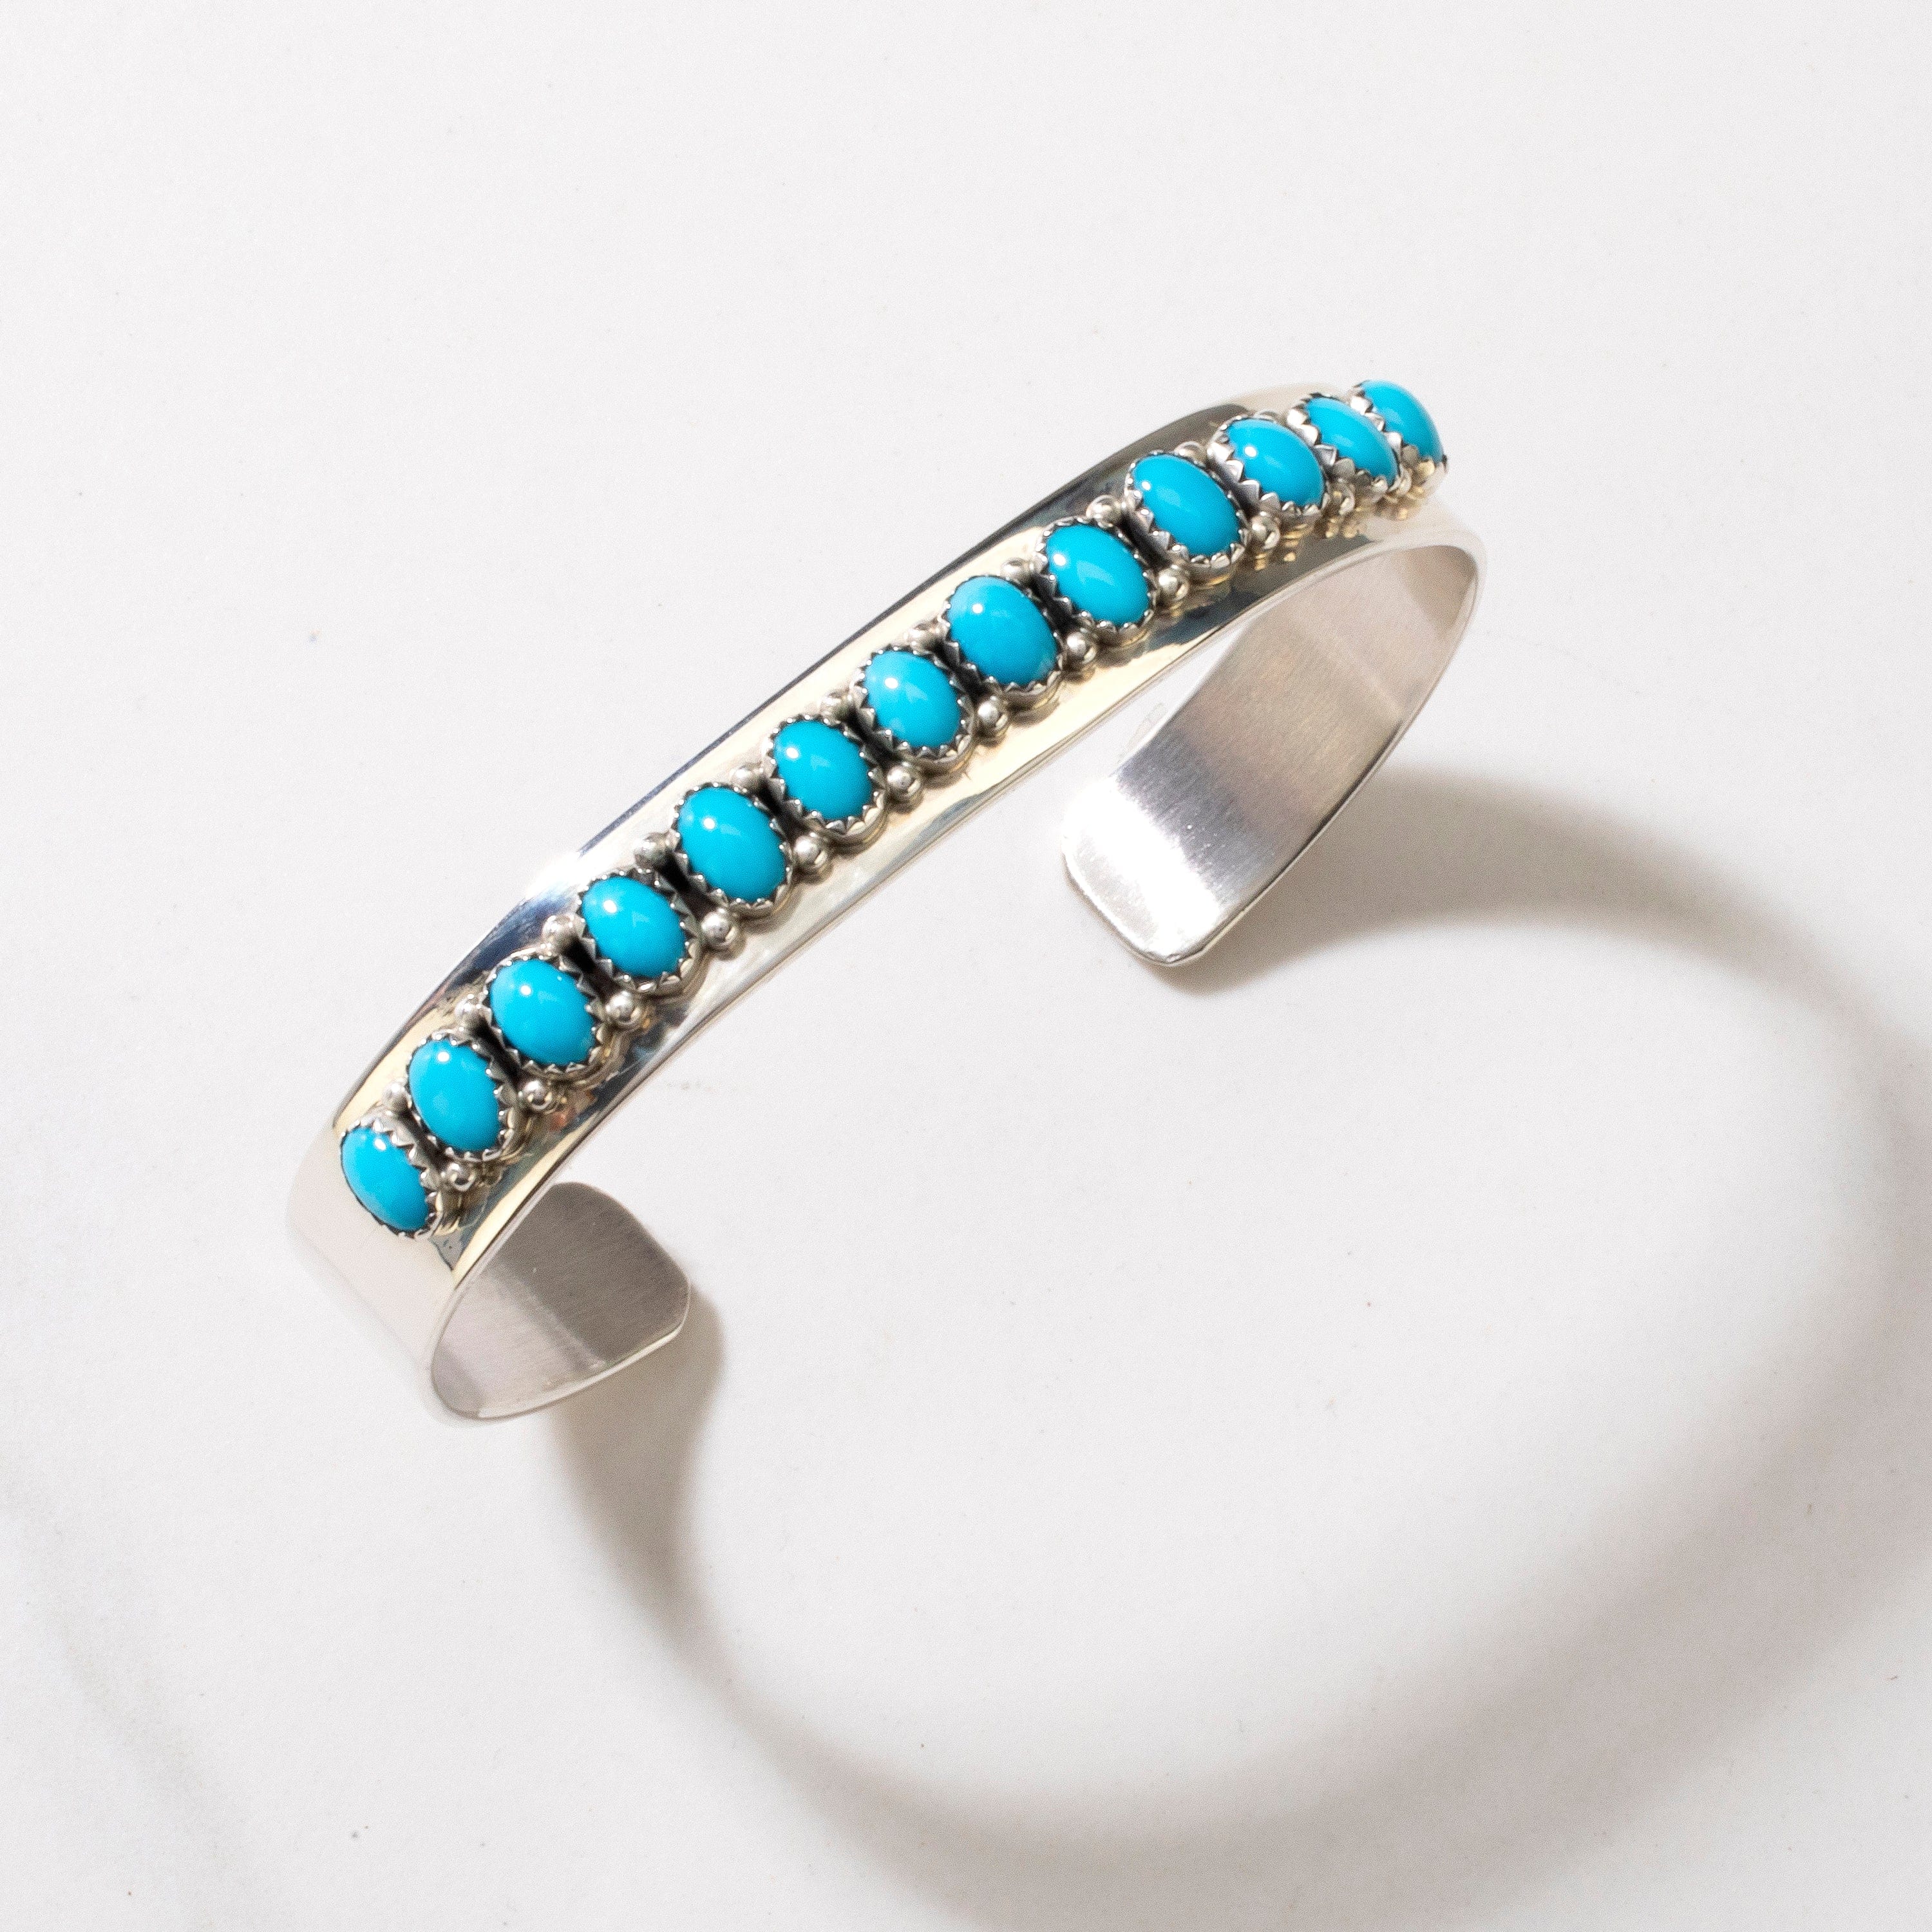 Kalifano Native American Jewelry Patrick Yazzie Sleeping Beauty Turquoise Navajo USA Native American Made 925 Sterling Silver Cuff NAB900.012